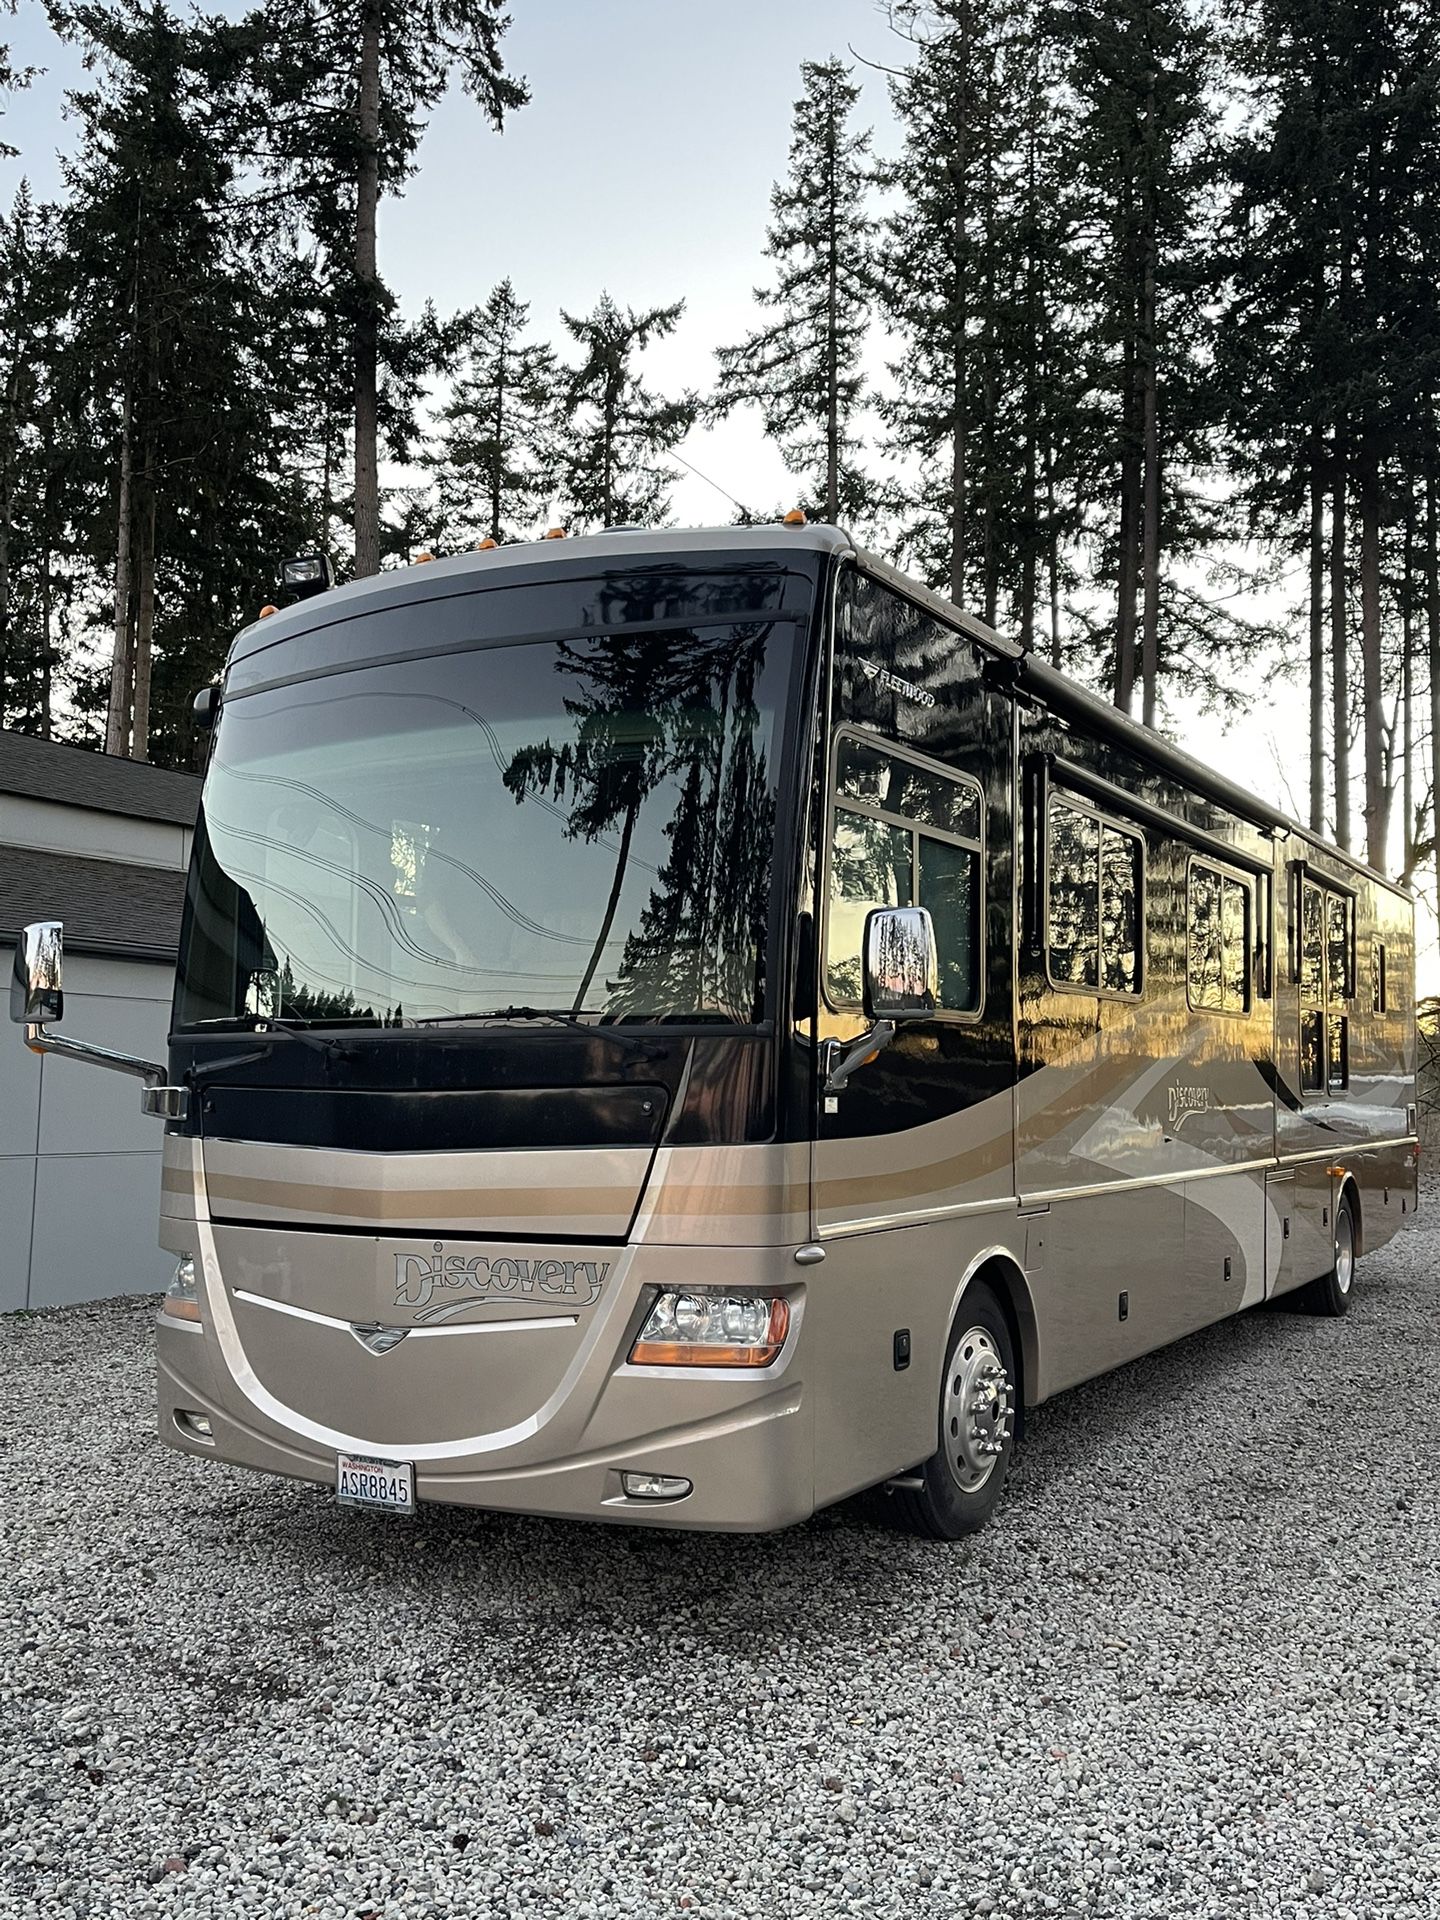 2008 Fleetwood DISCOVERY 40X Class A for sale. This motorhome is a clean title, 46k miles